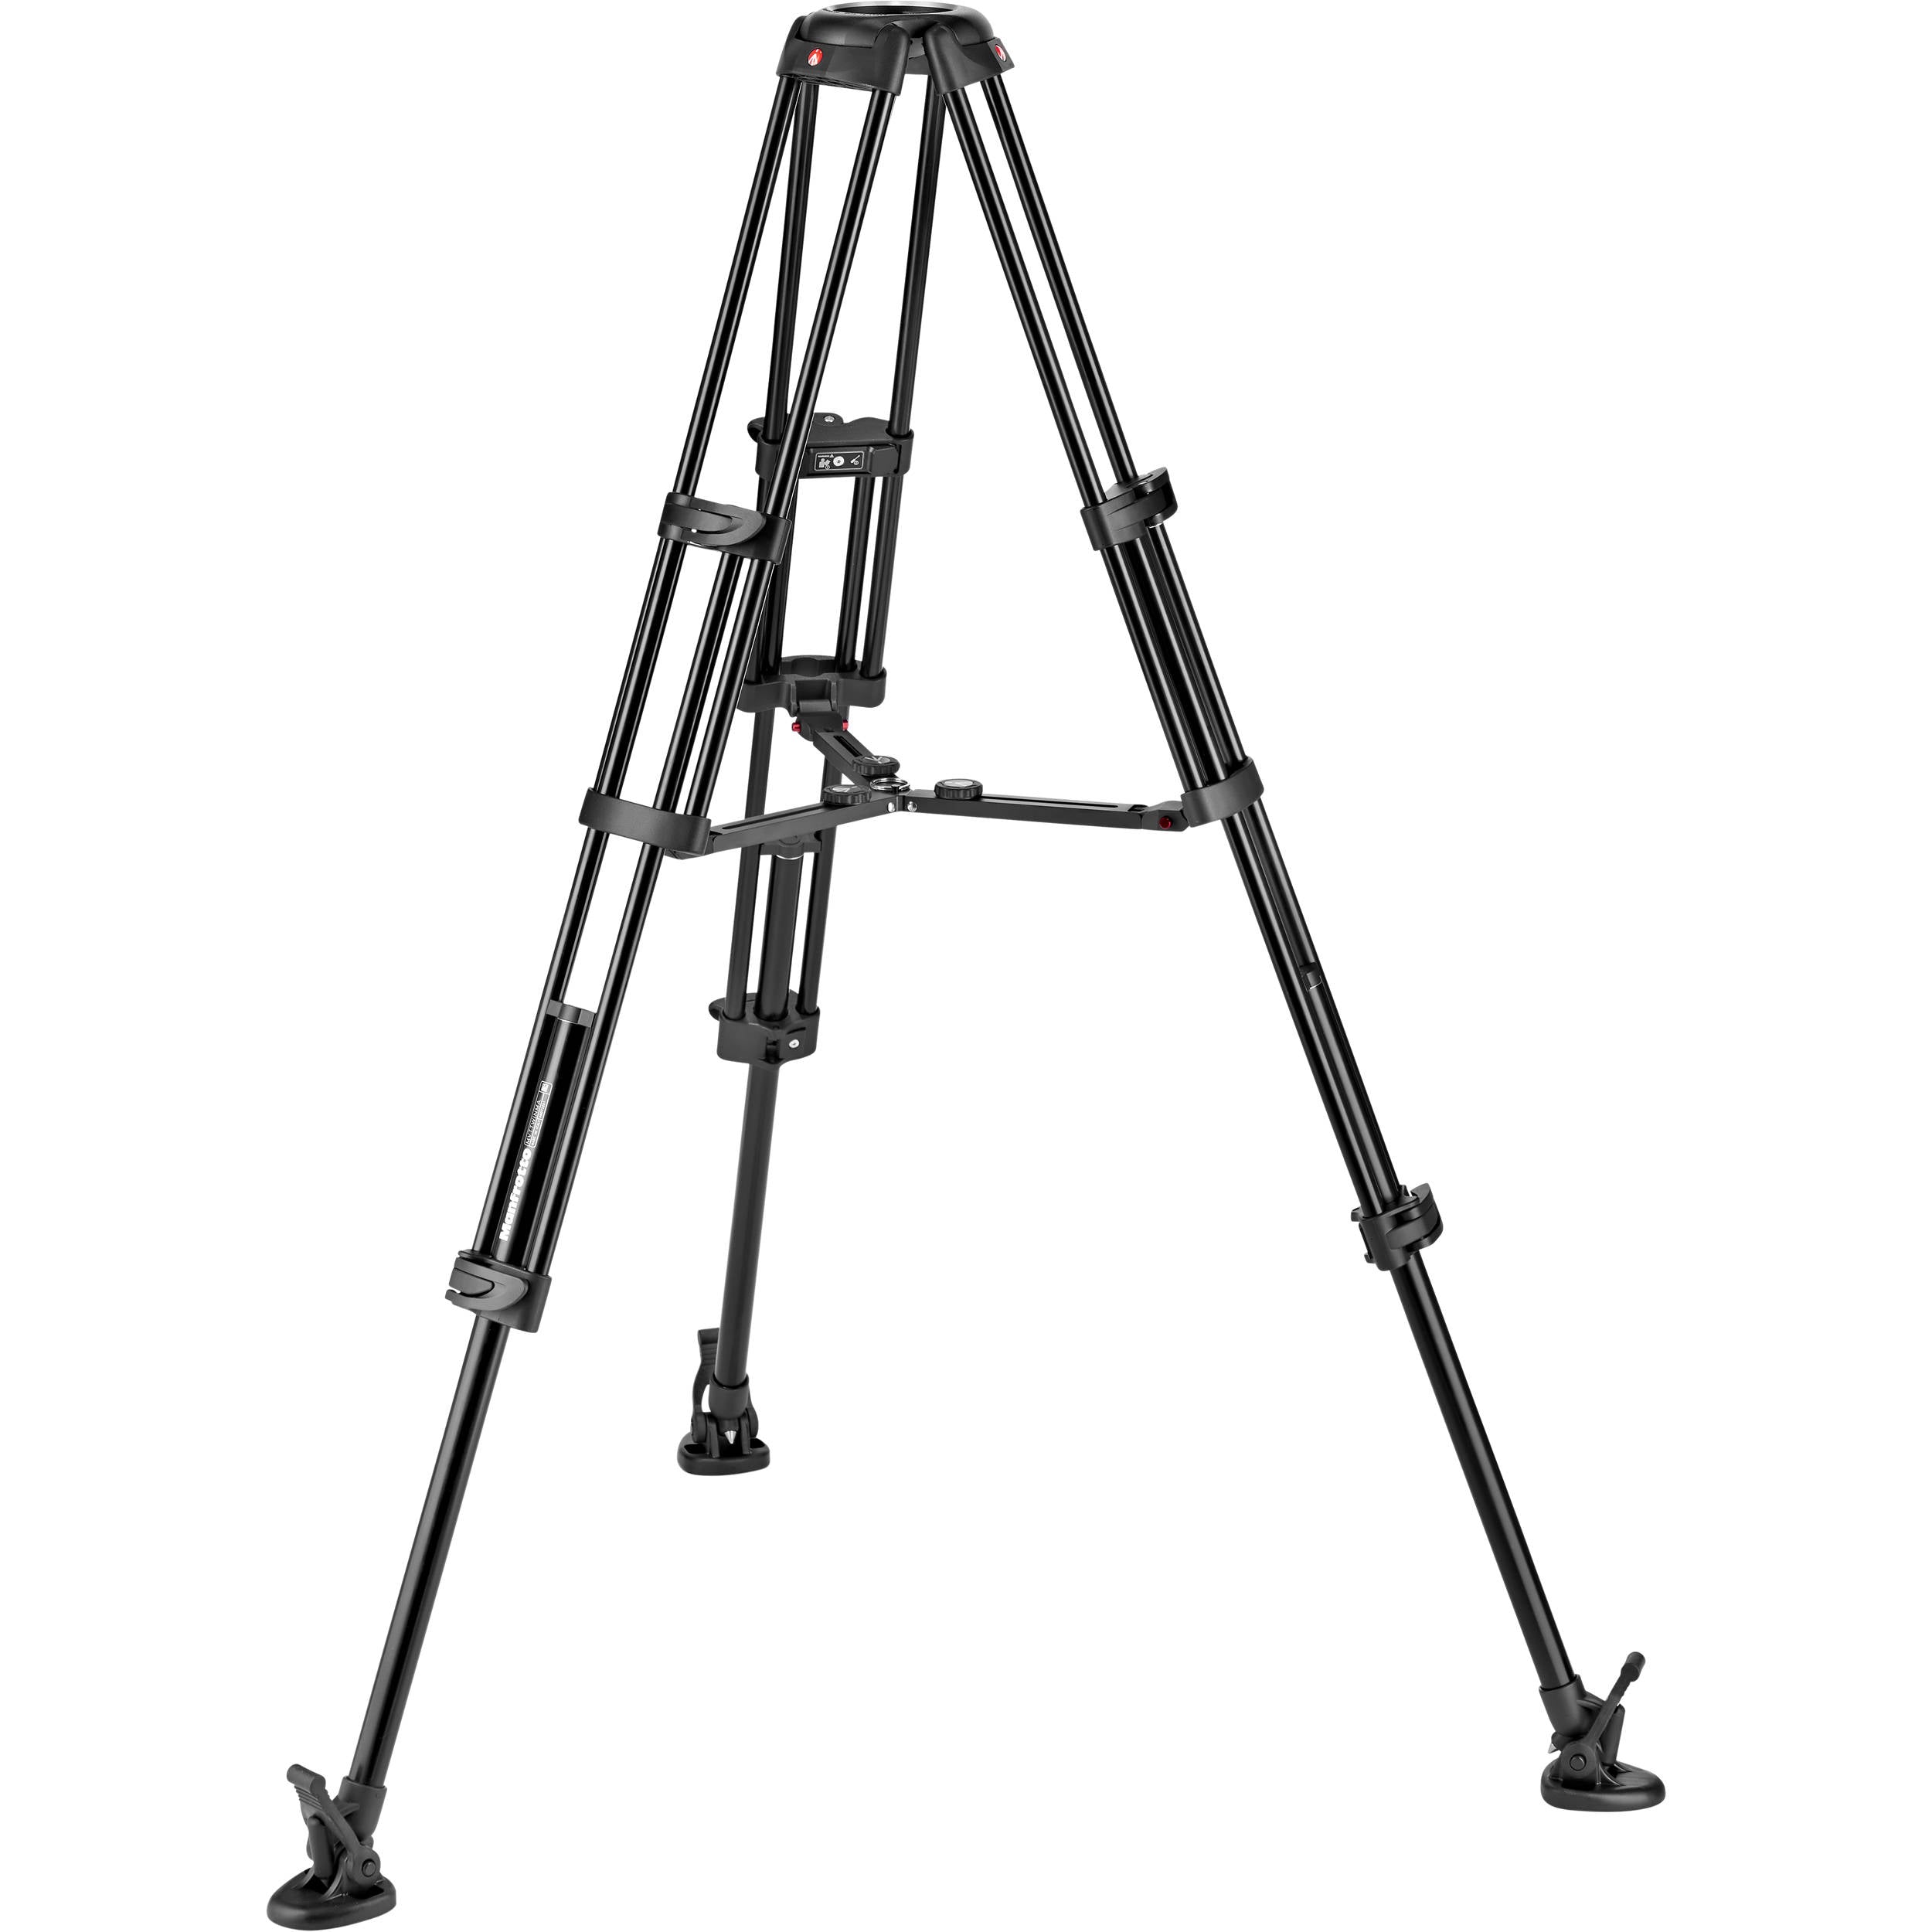 Manfrotto Aluminum Twin Leg Video Tripod with Mid-Level Spreader